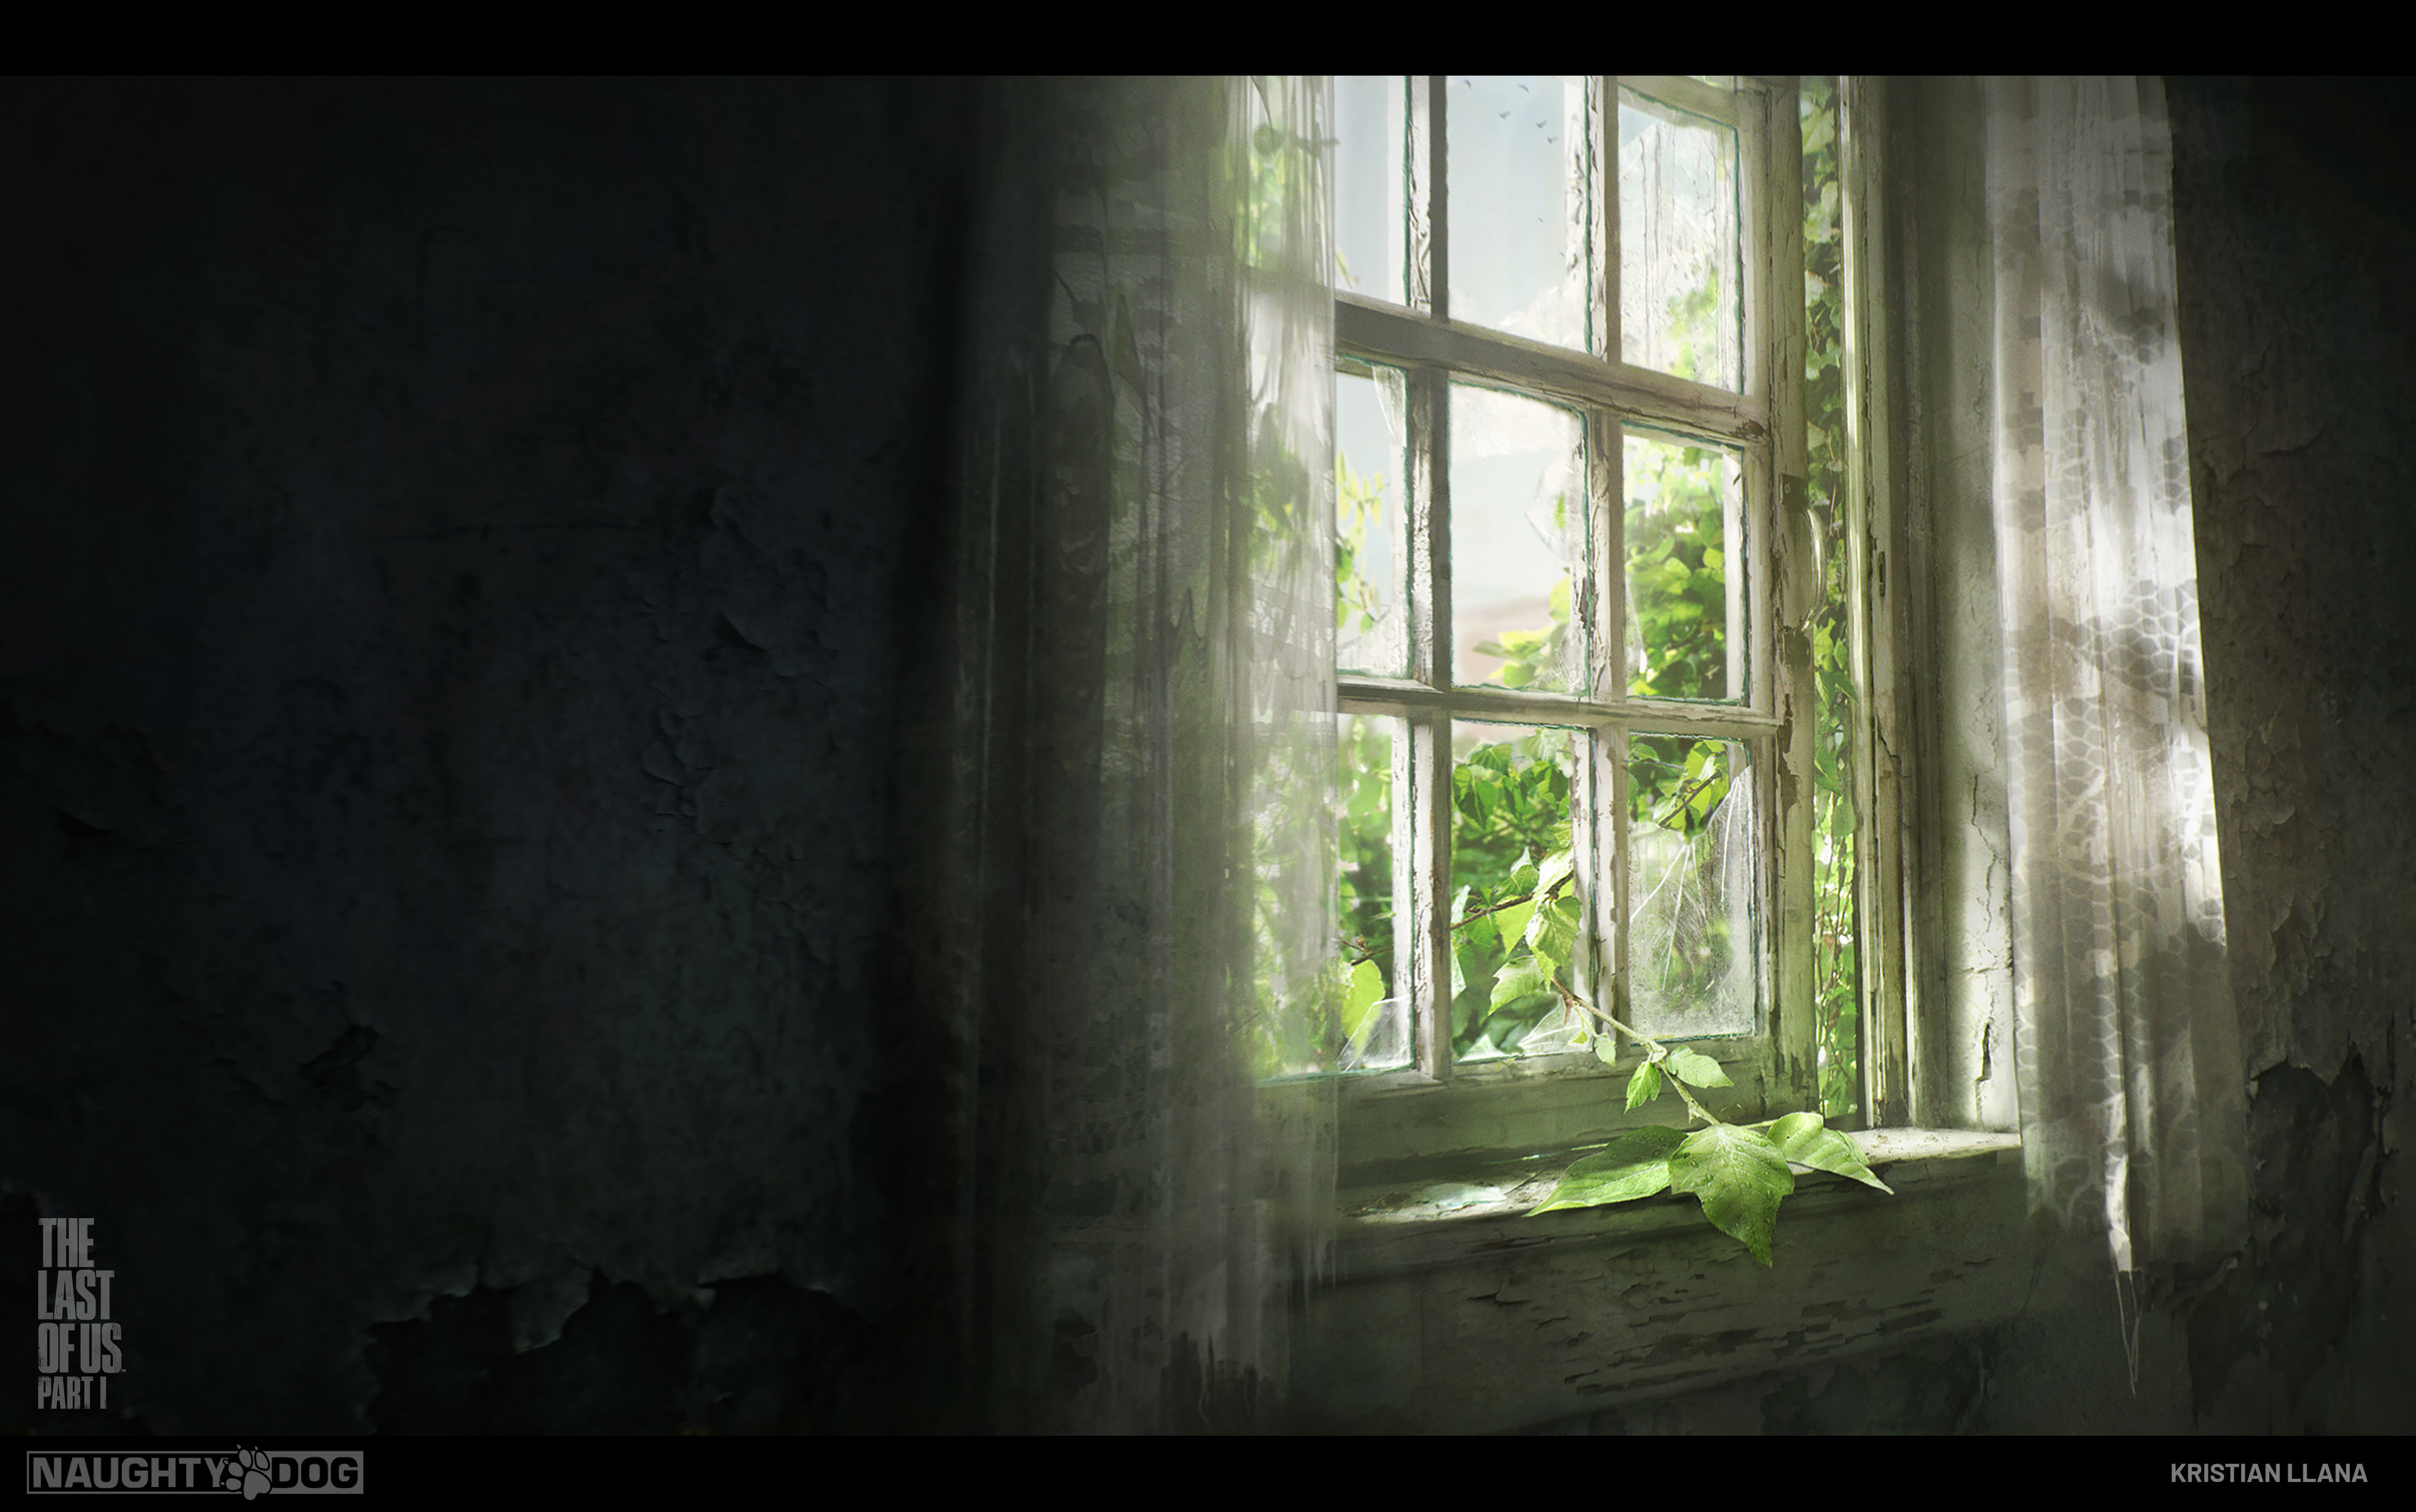 Oficina Steam::The Last of Us - Title Screen